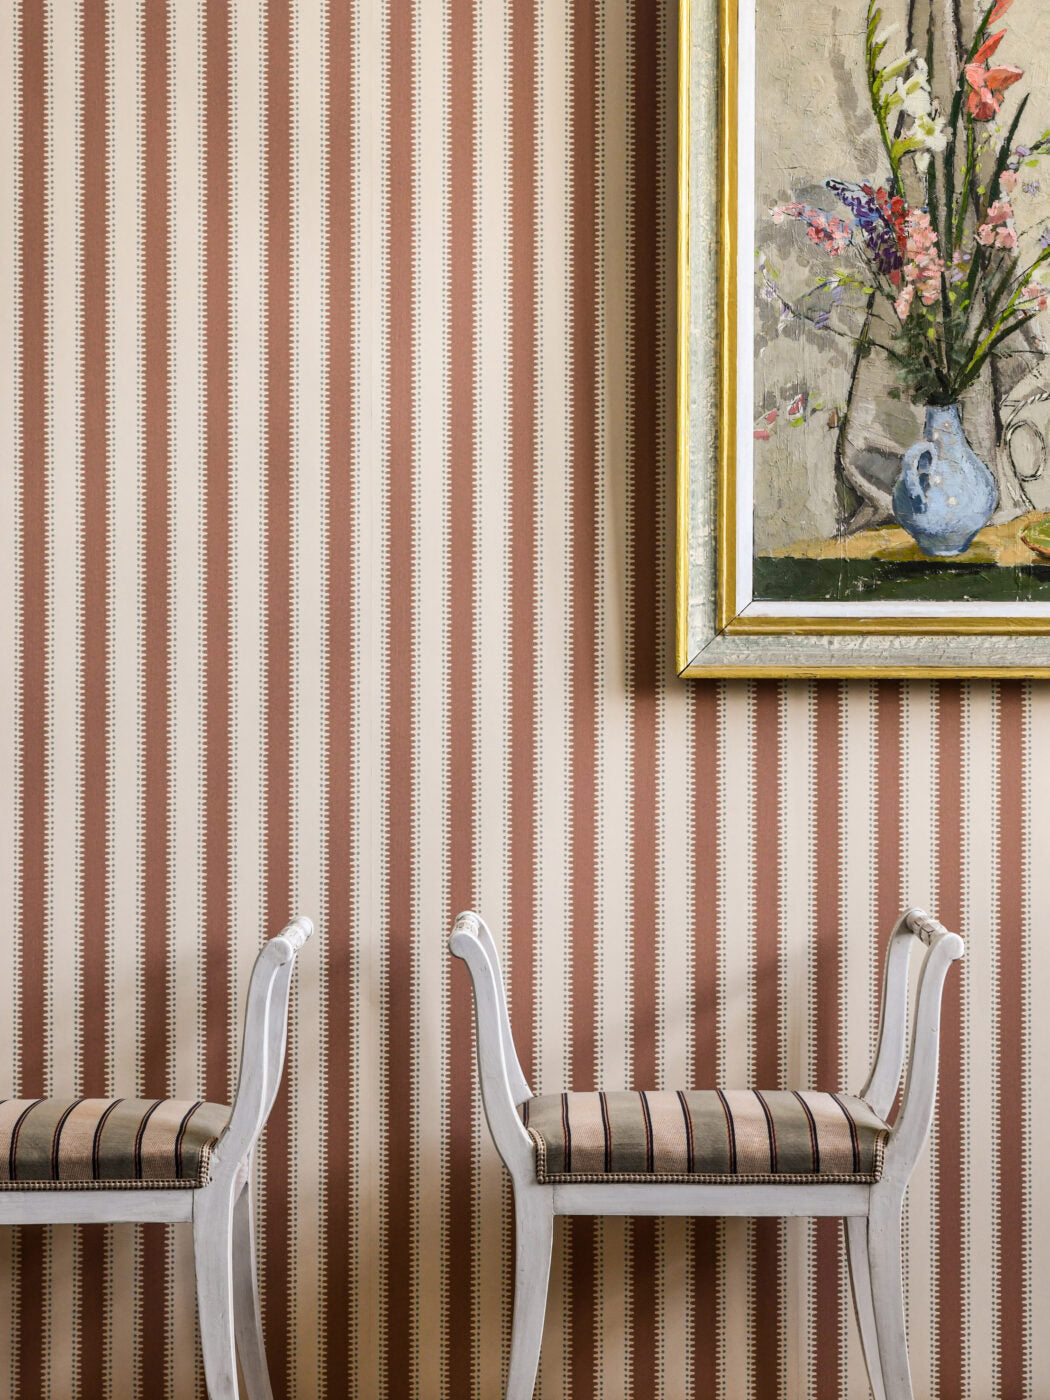  Make a stripe with jagged edges, add some dots and you’ll get a decorative, more playful striped wallpaper. 